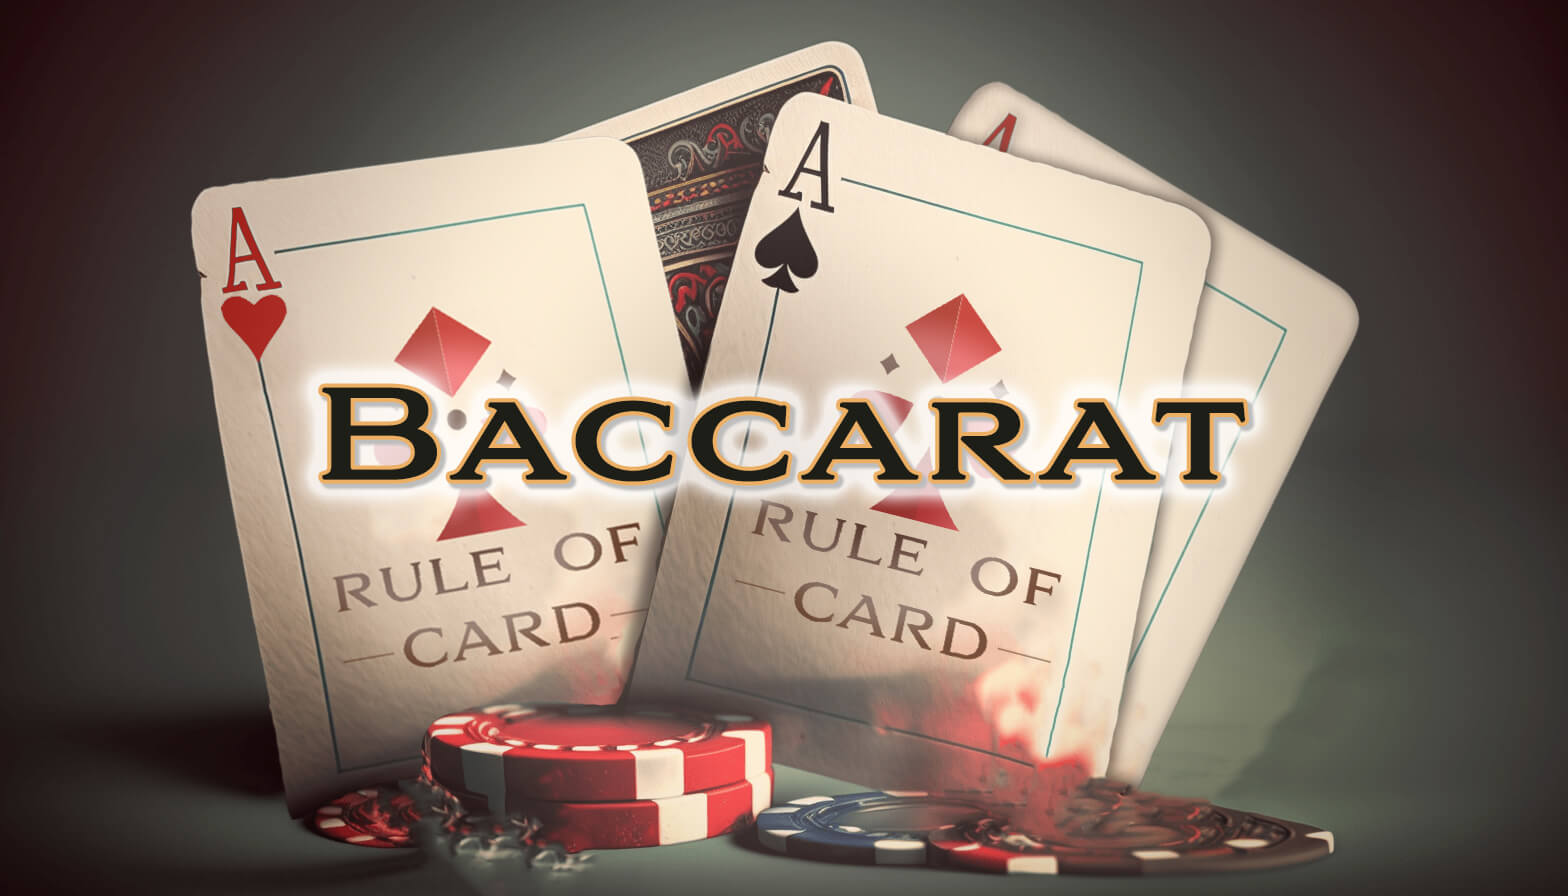 Playing the card game Baccarat